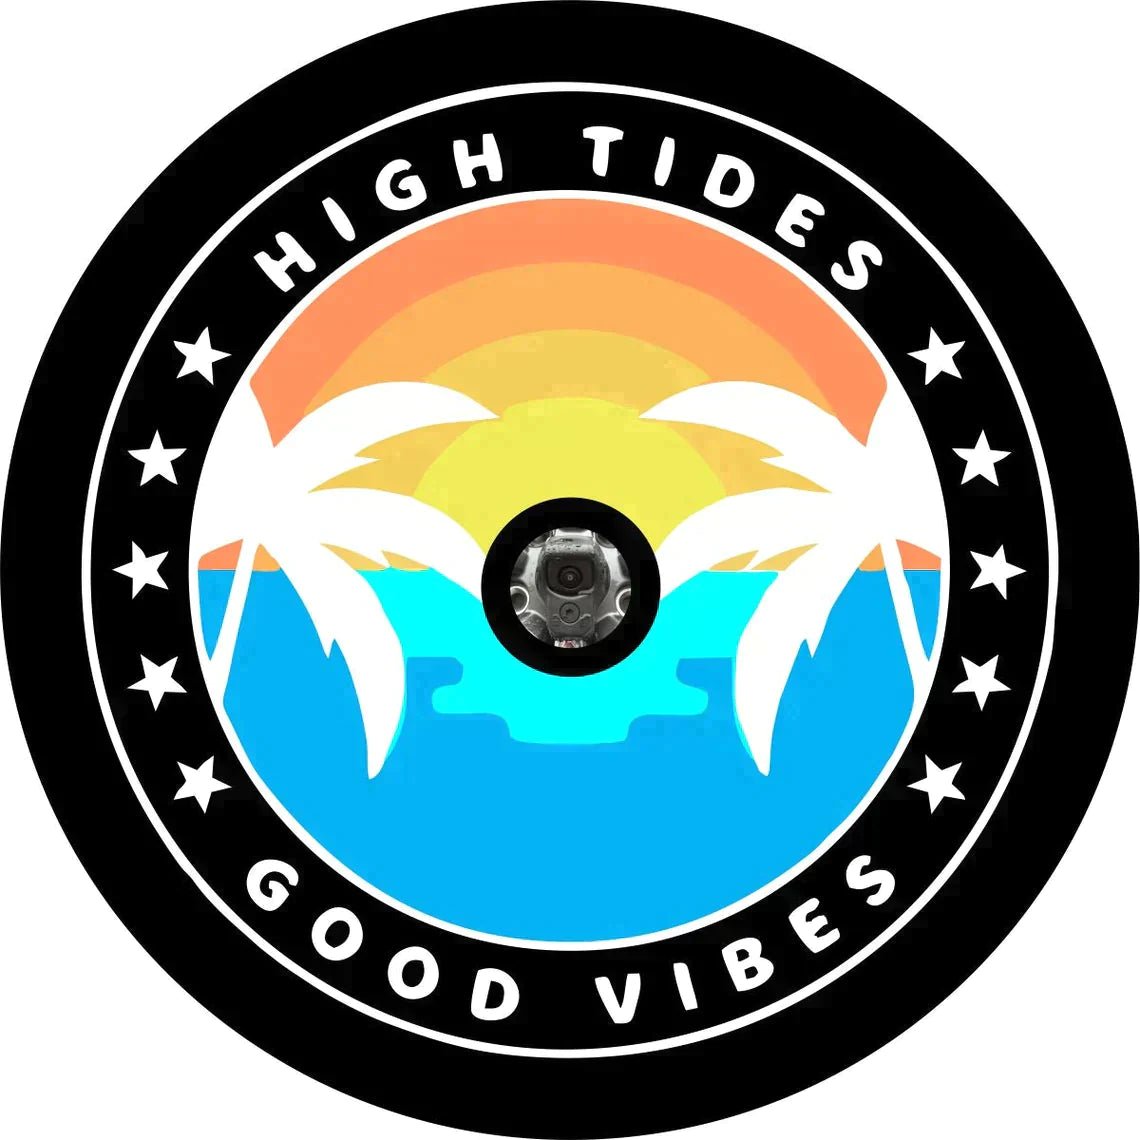 High Tides Good Vibes Spare Tire Cover - Goats Trail